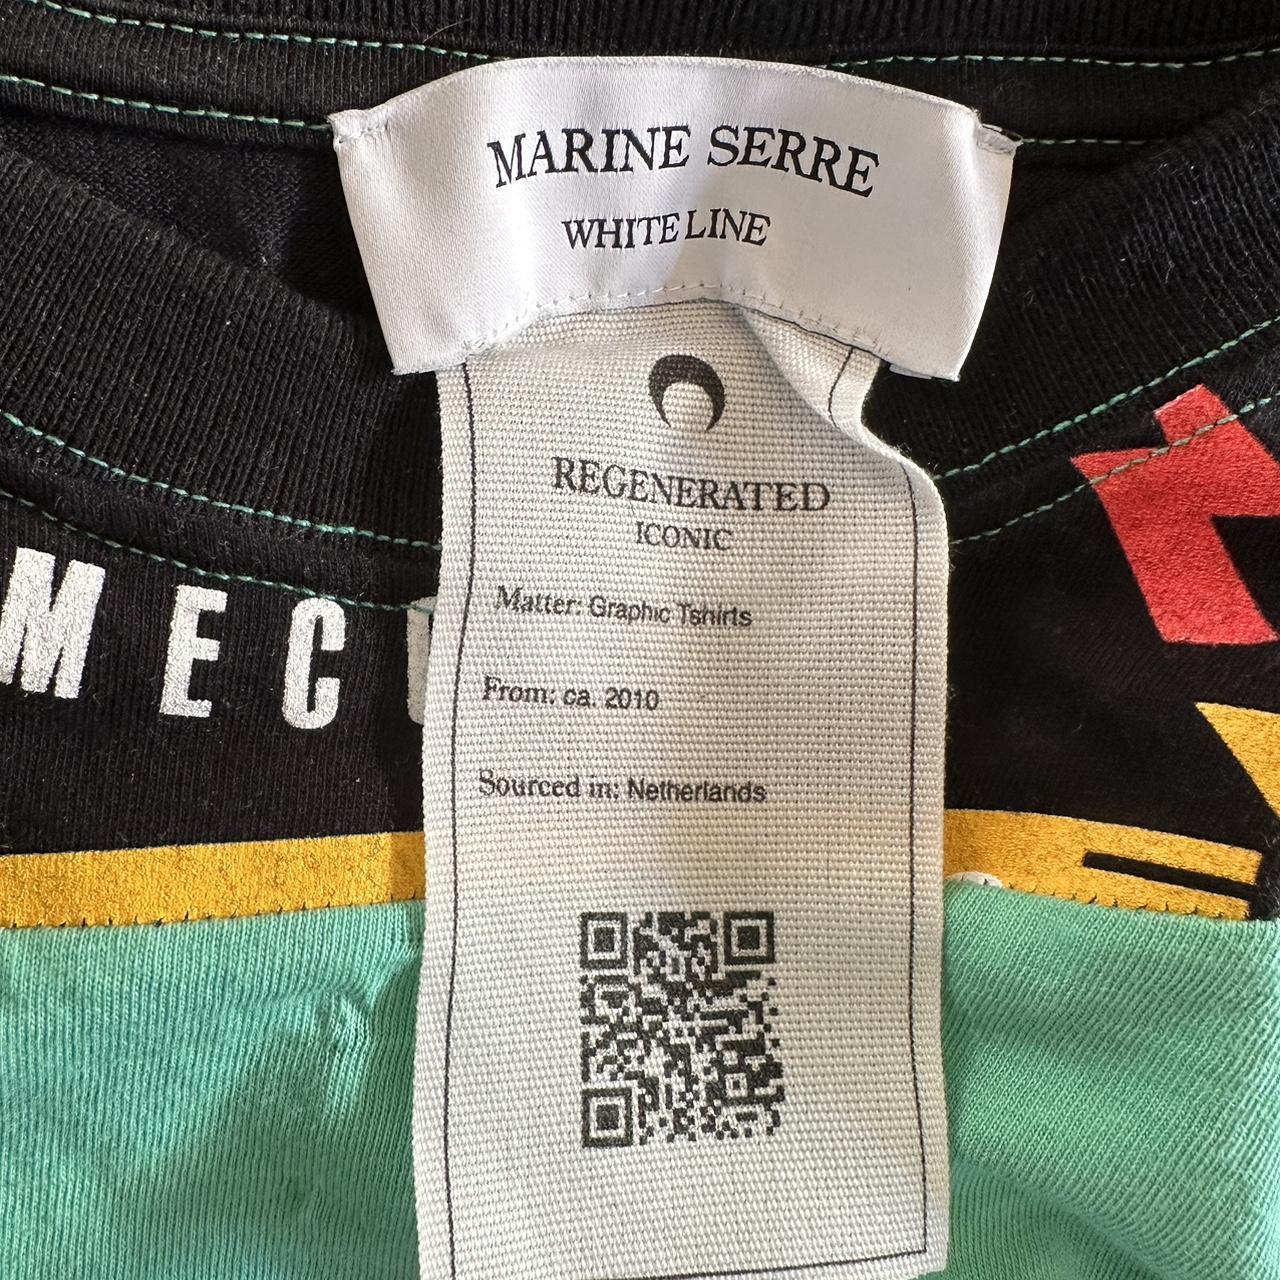 Marine serre shirt; open to offers and negotiation - Depop